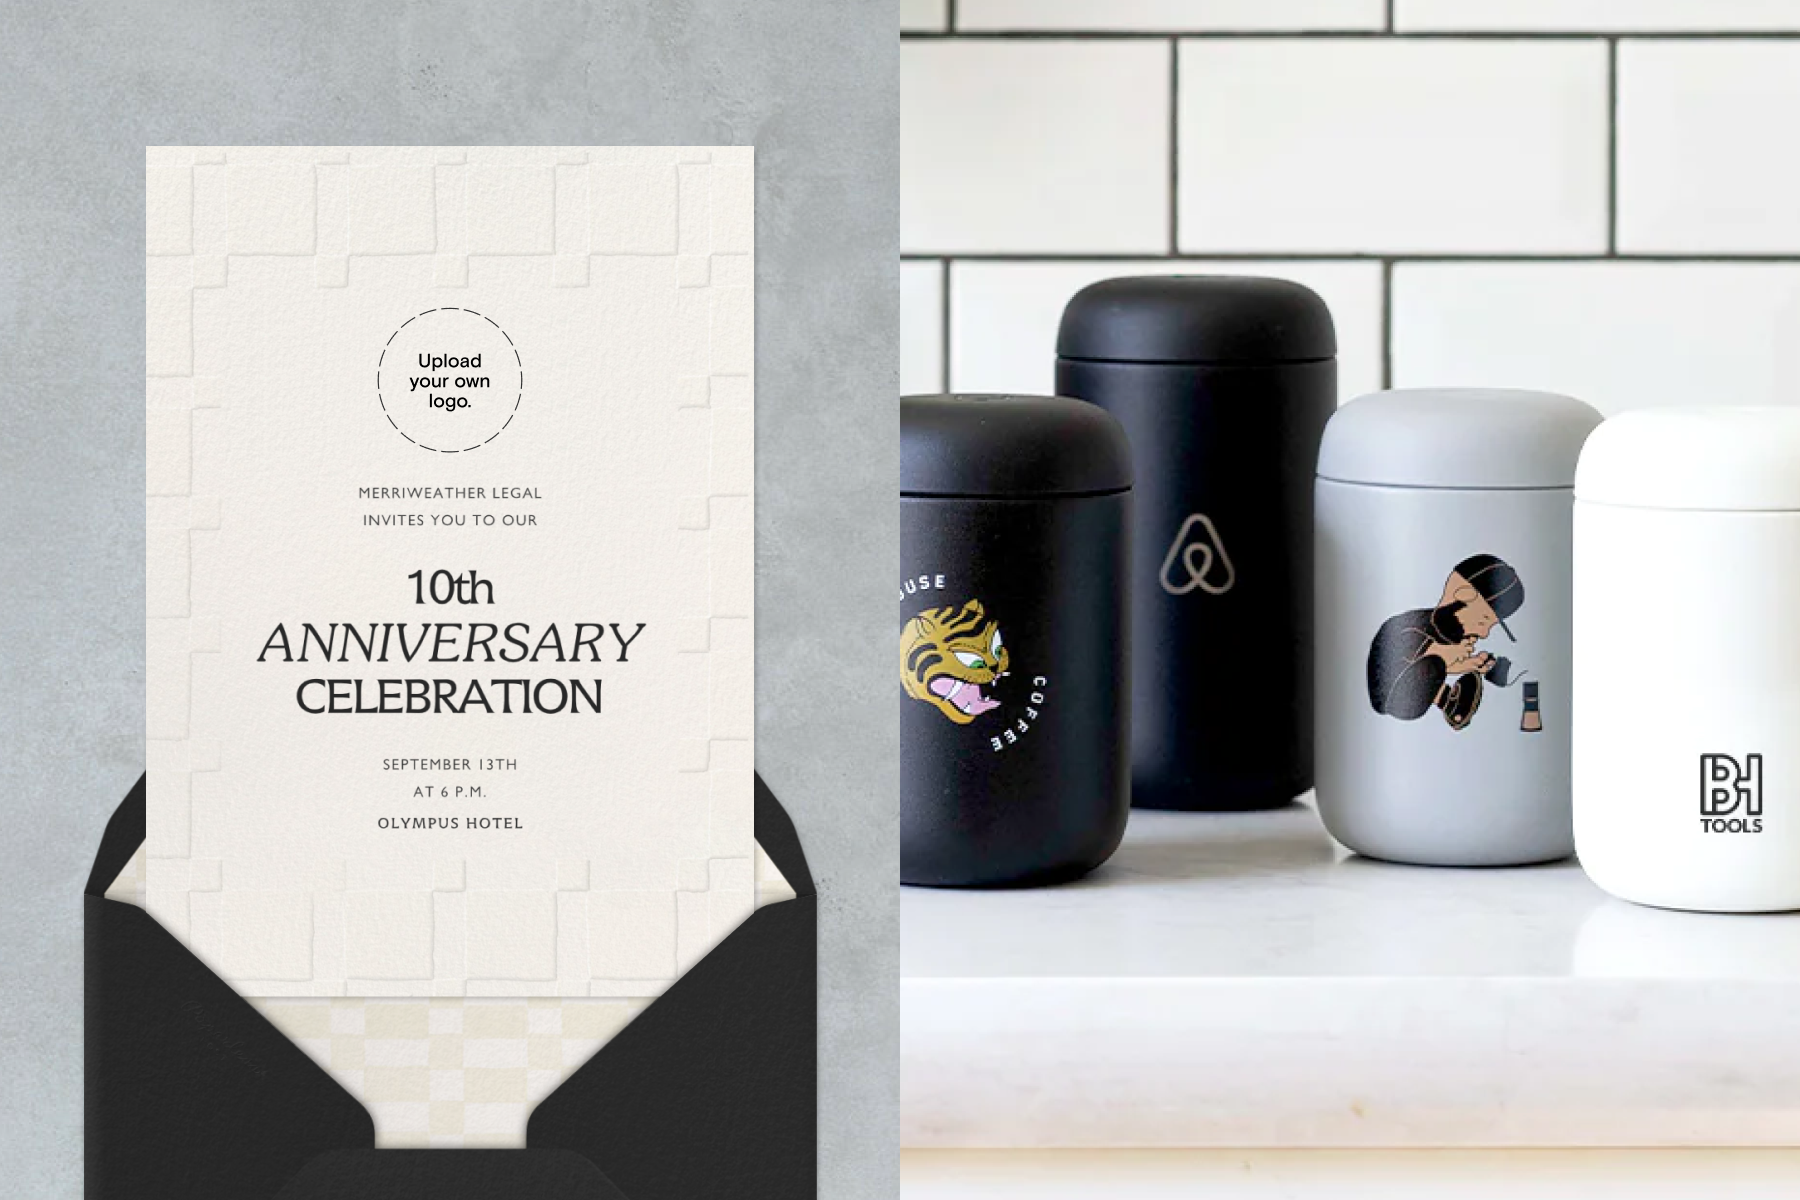 An invitation with embossed squares around the border; four insulated drinking vessels in shades of black, gray, and white with logos.